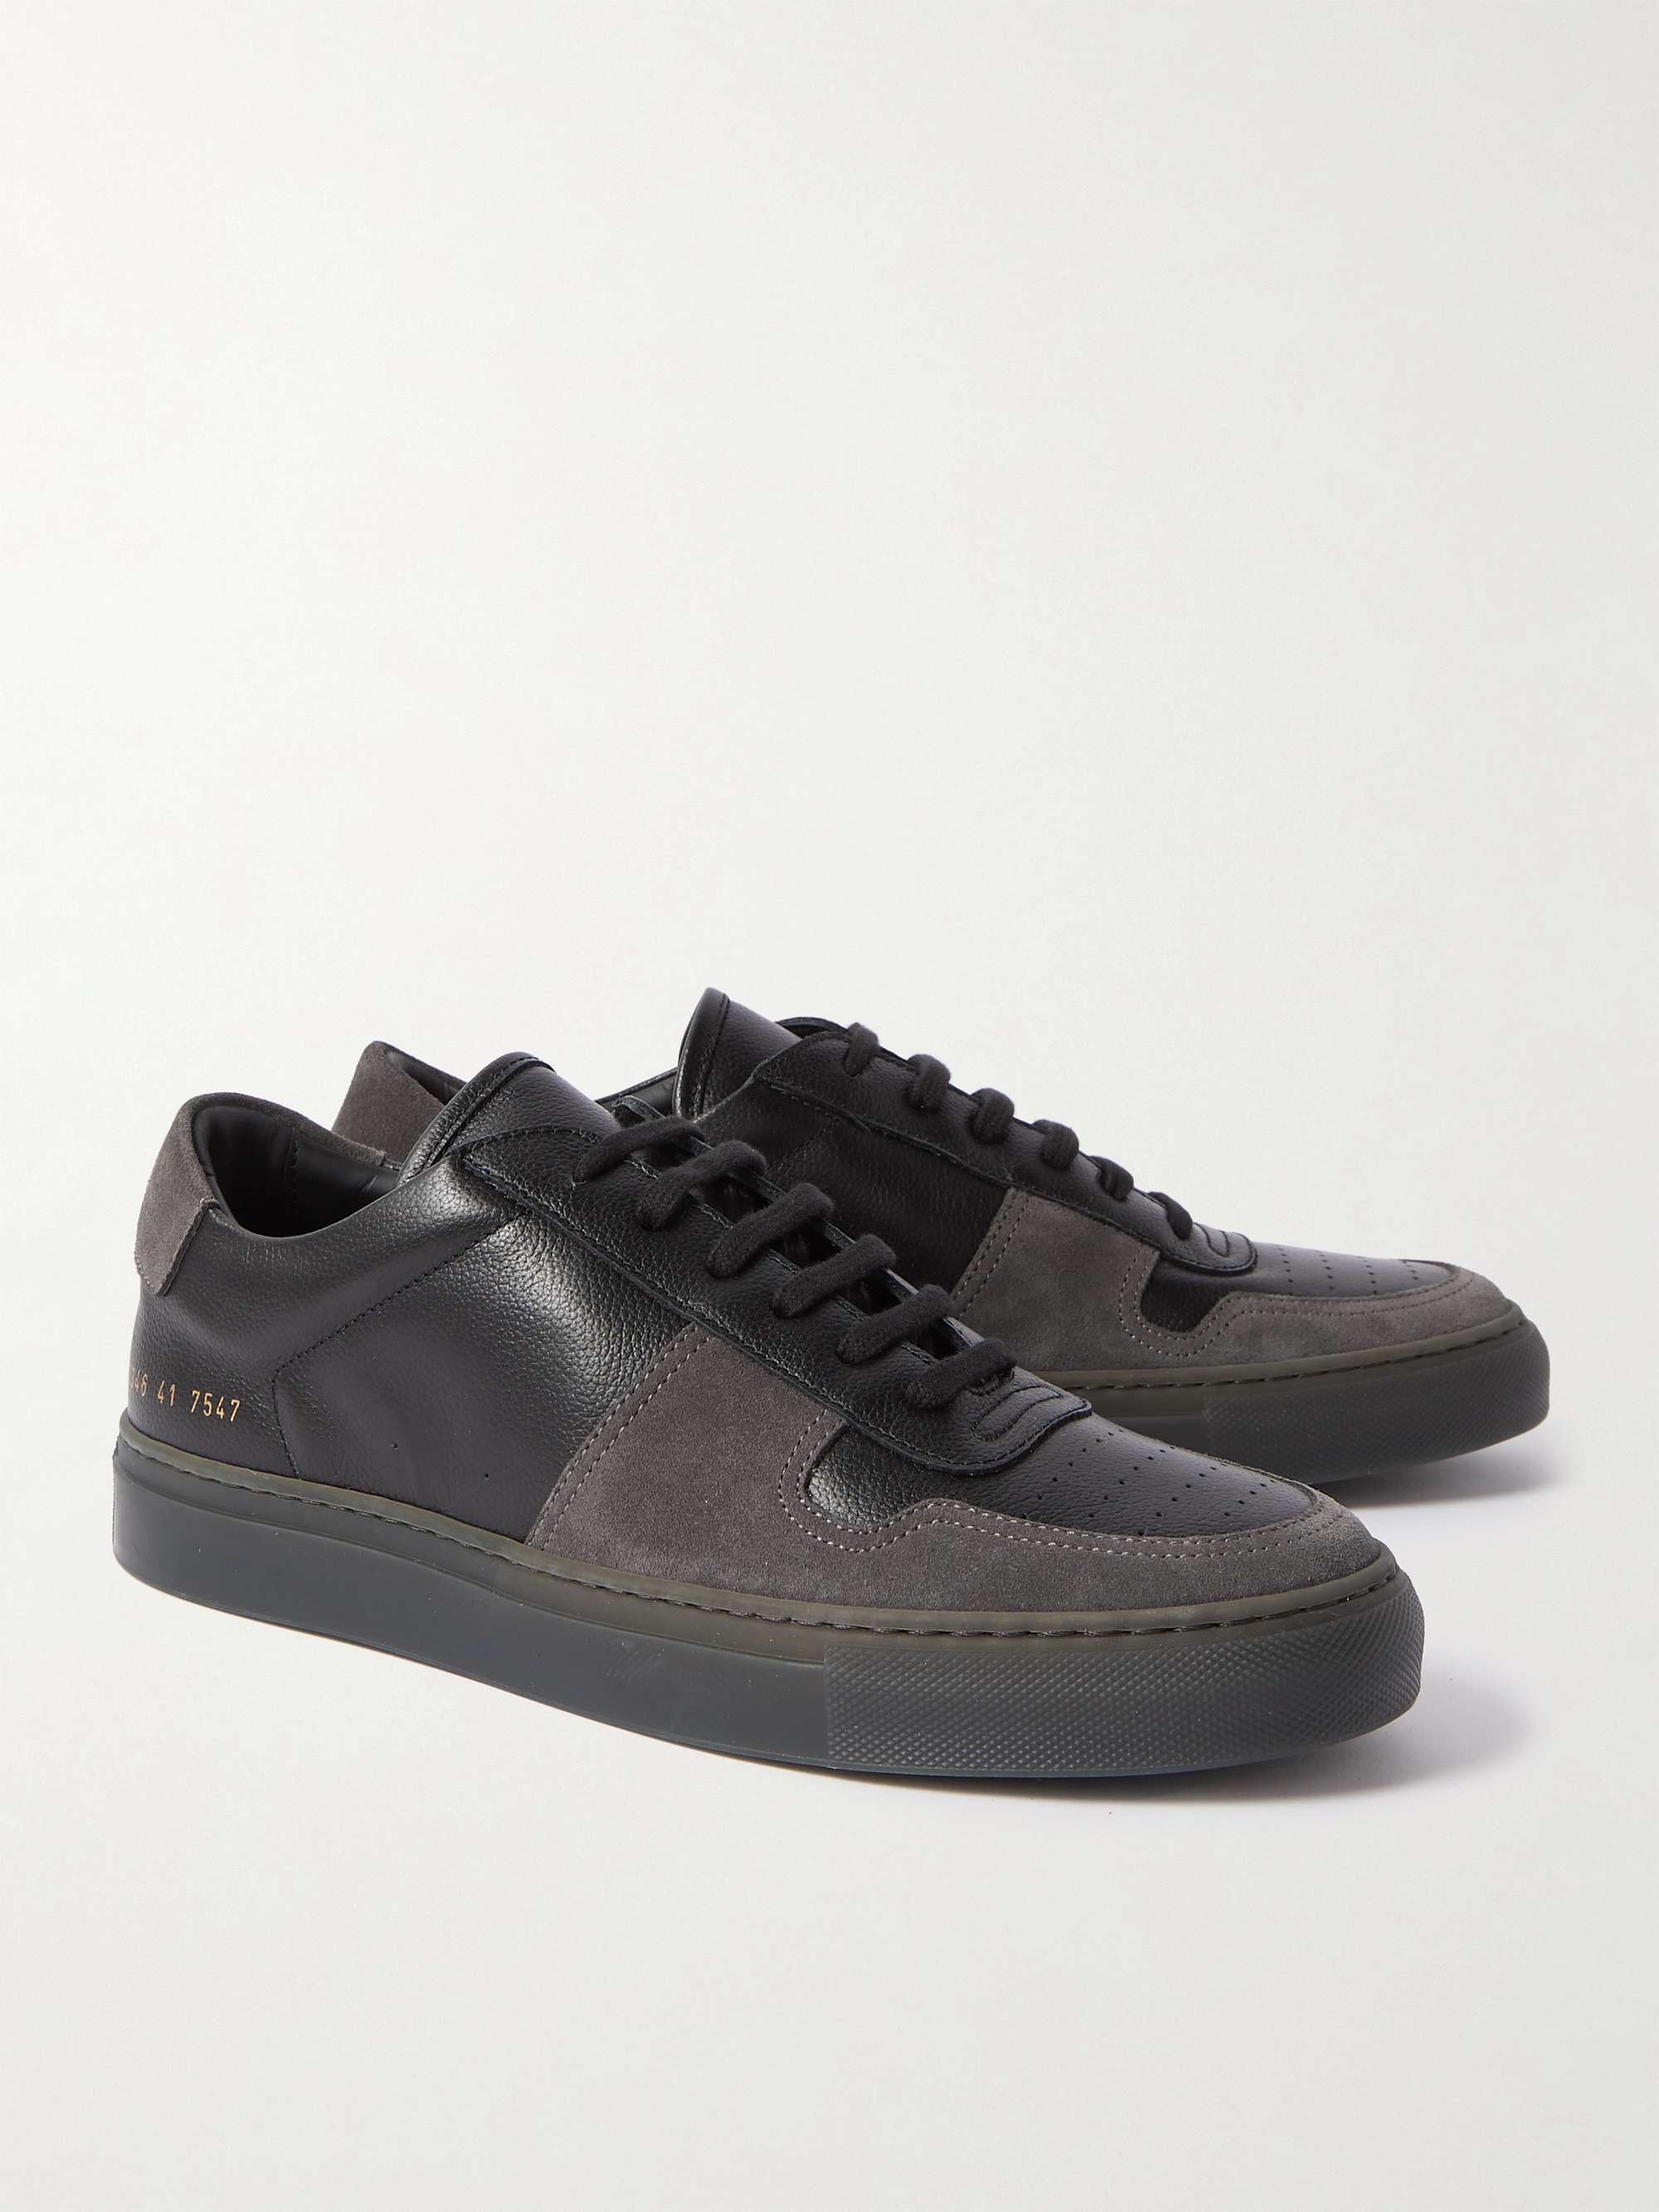 COMMON PROJECTS BBall Full-Grain Leather and Suede Sneakers